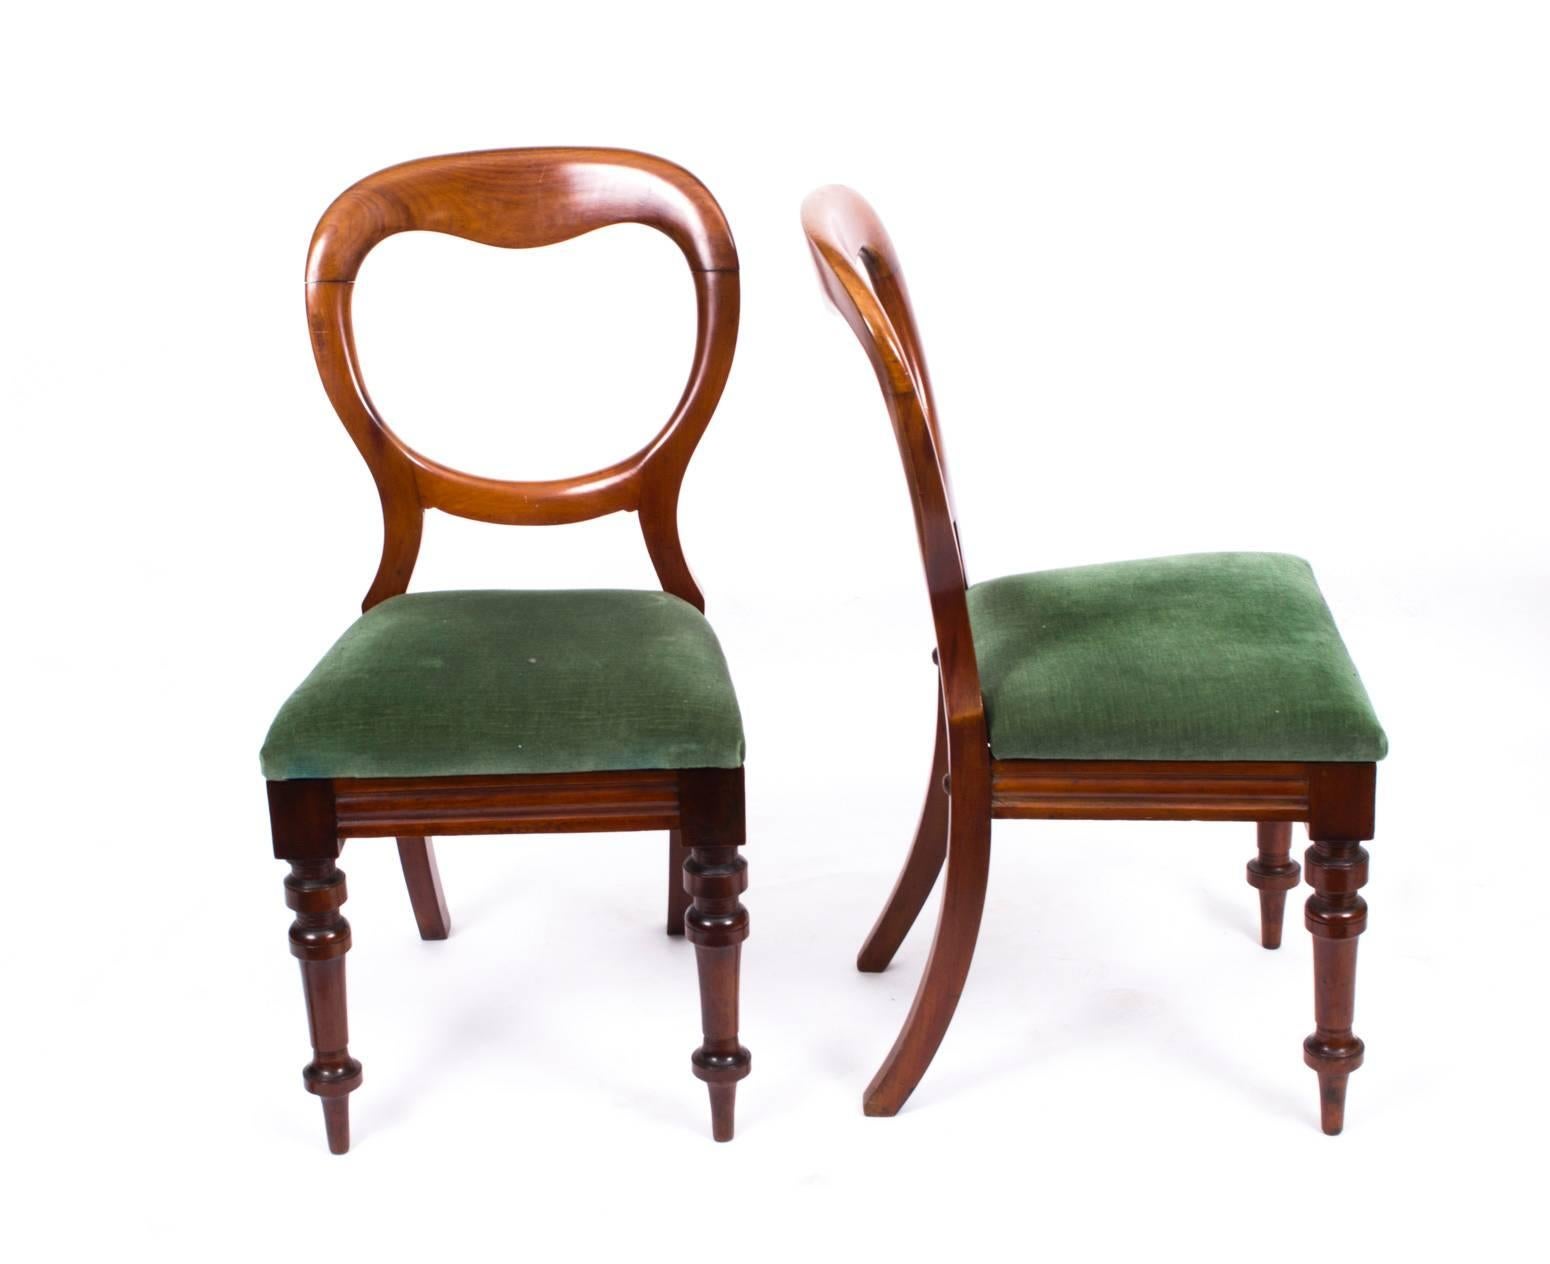 A superb set of ten antique Victorian mahogany dining chairs, circa 1880 in date.
 
With balloon shaped open backs, drop in seats upholstered in a sumptuous green velvet, and raised on turned tapered front legs with scroll back legs.

These